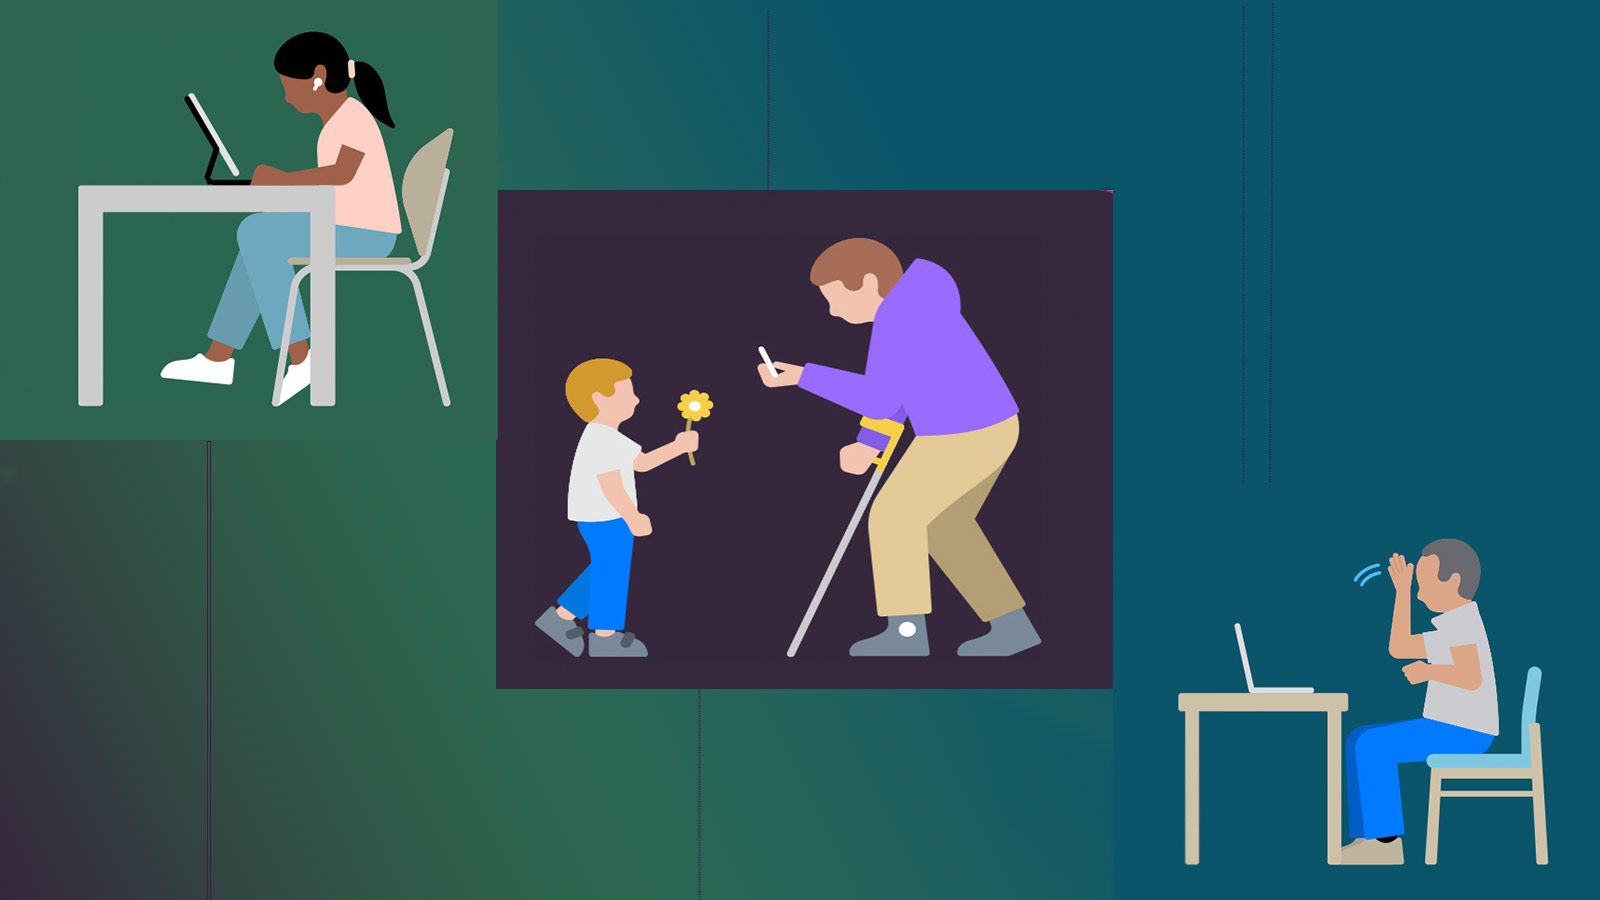 Illustration of a person wearing assistive hearing device at a computer, a person with a forearm crutch taking a photo, and a person speaking to colleagues using ASL.